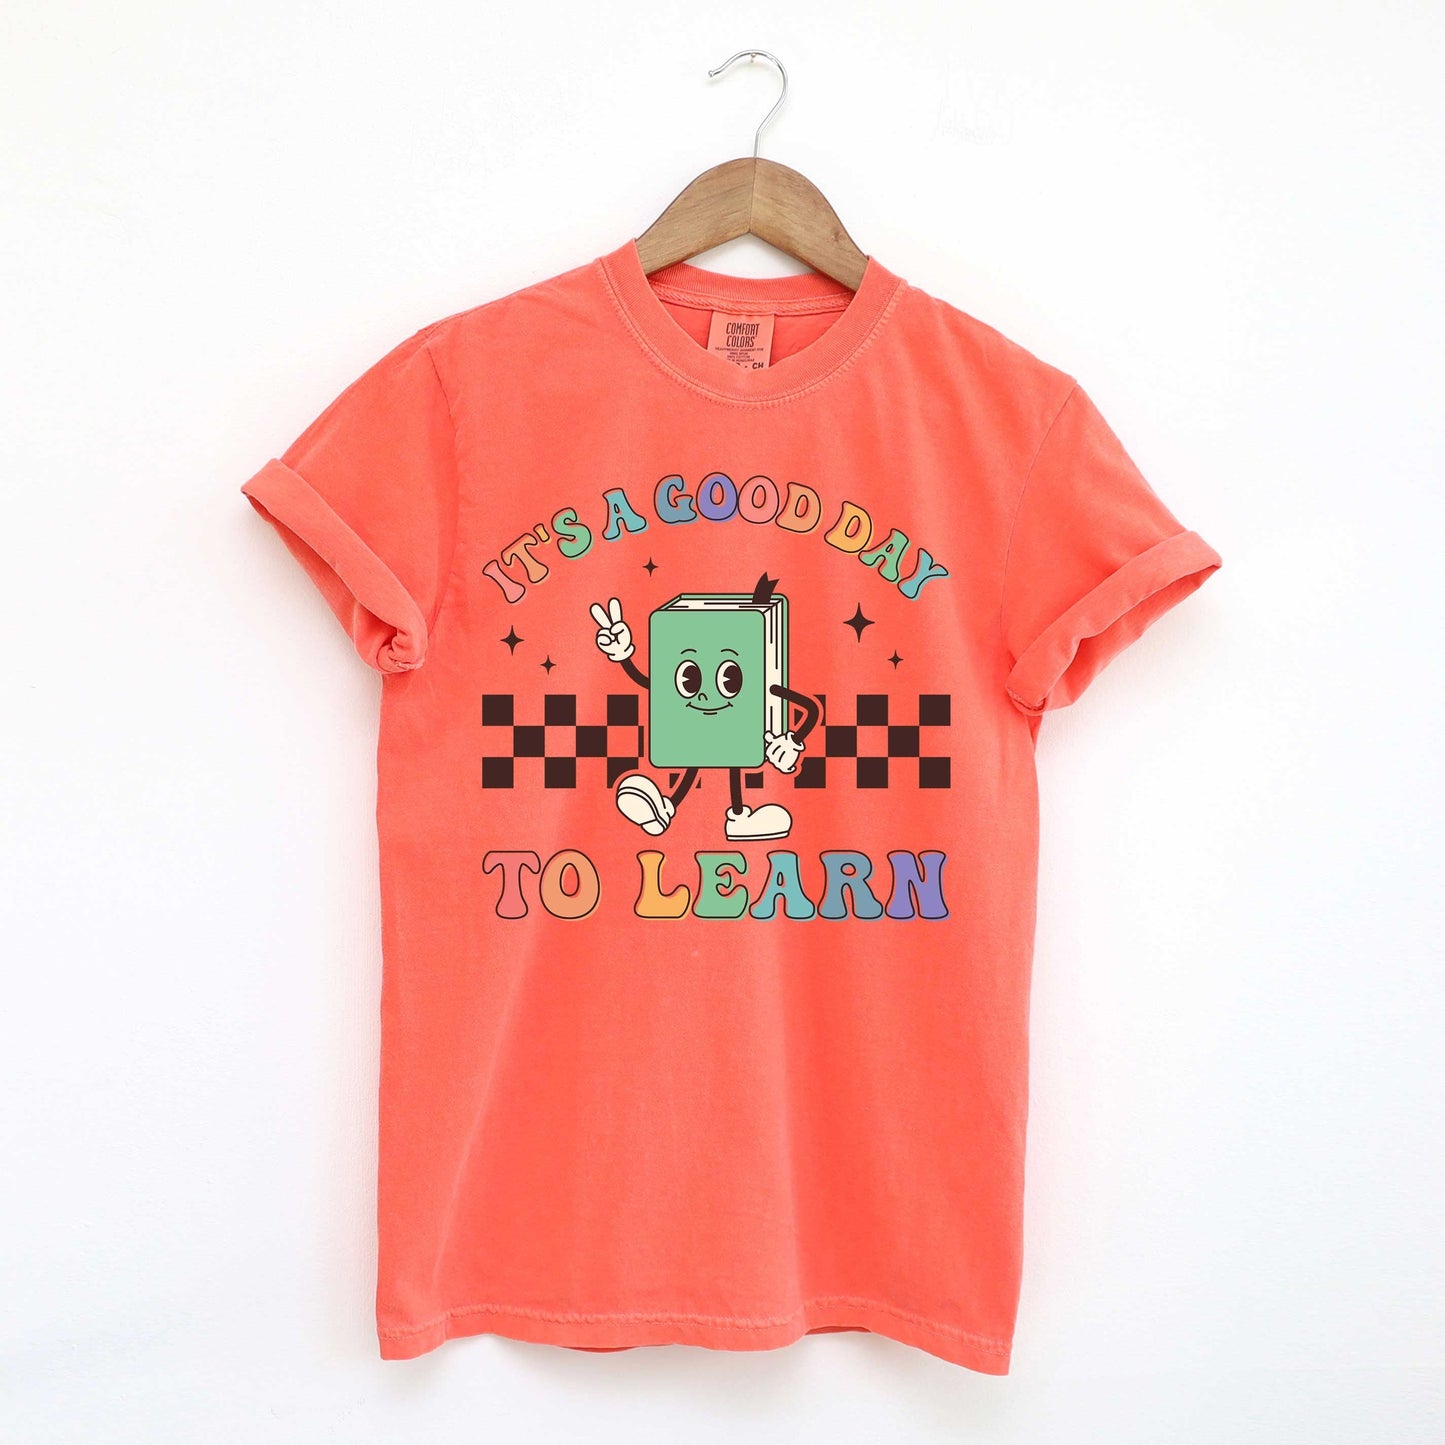 Clearance It's A Good Day To Learn Checkered | Garment Dyed Short Sleeve Tee